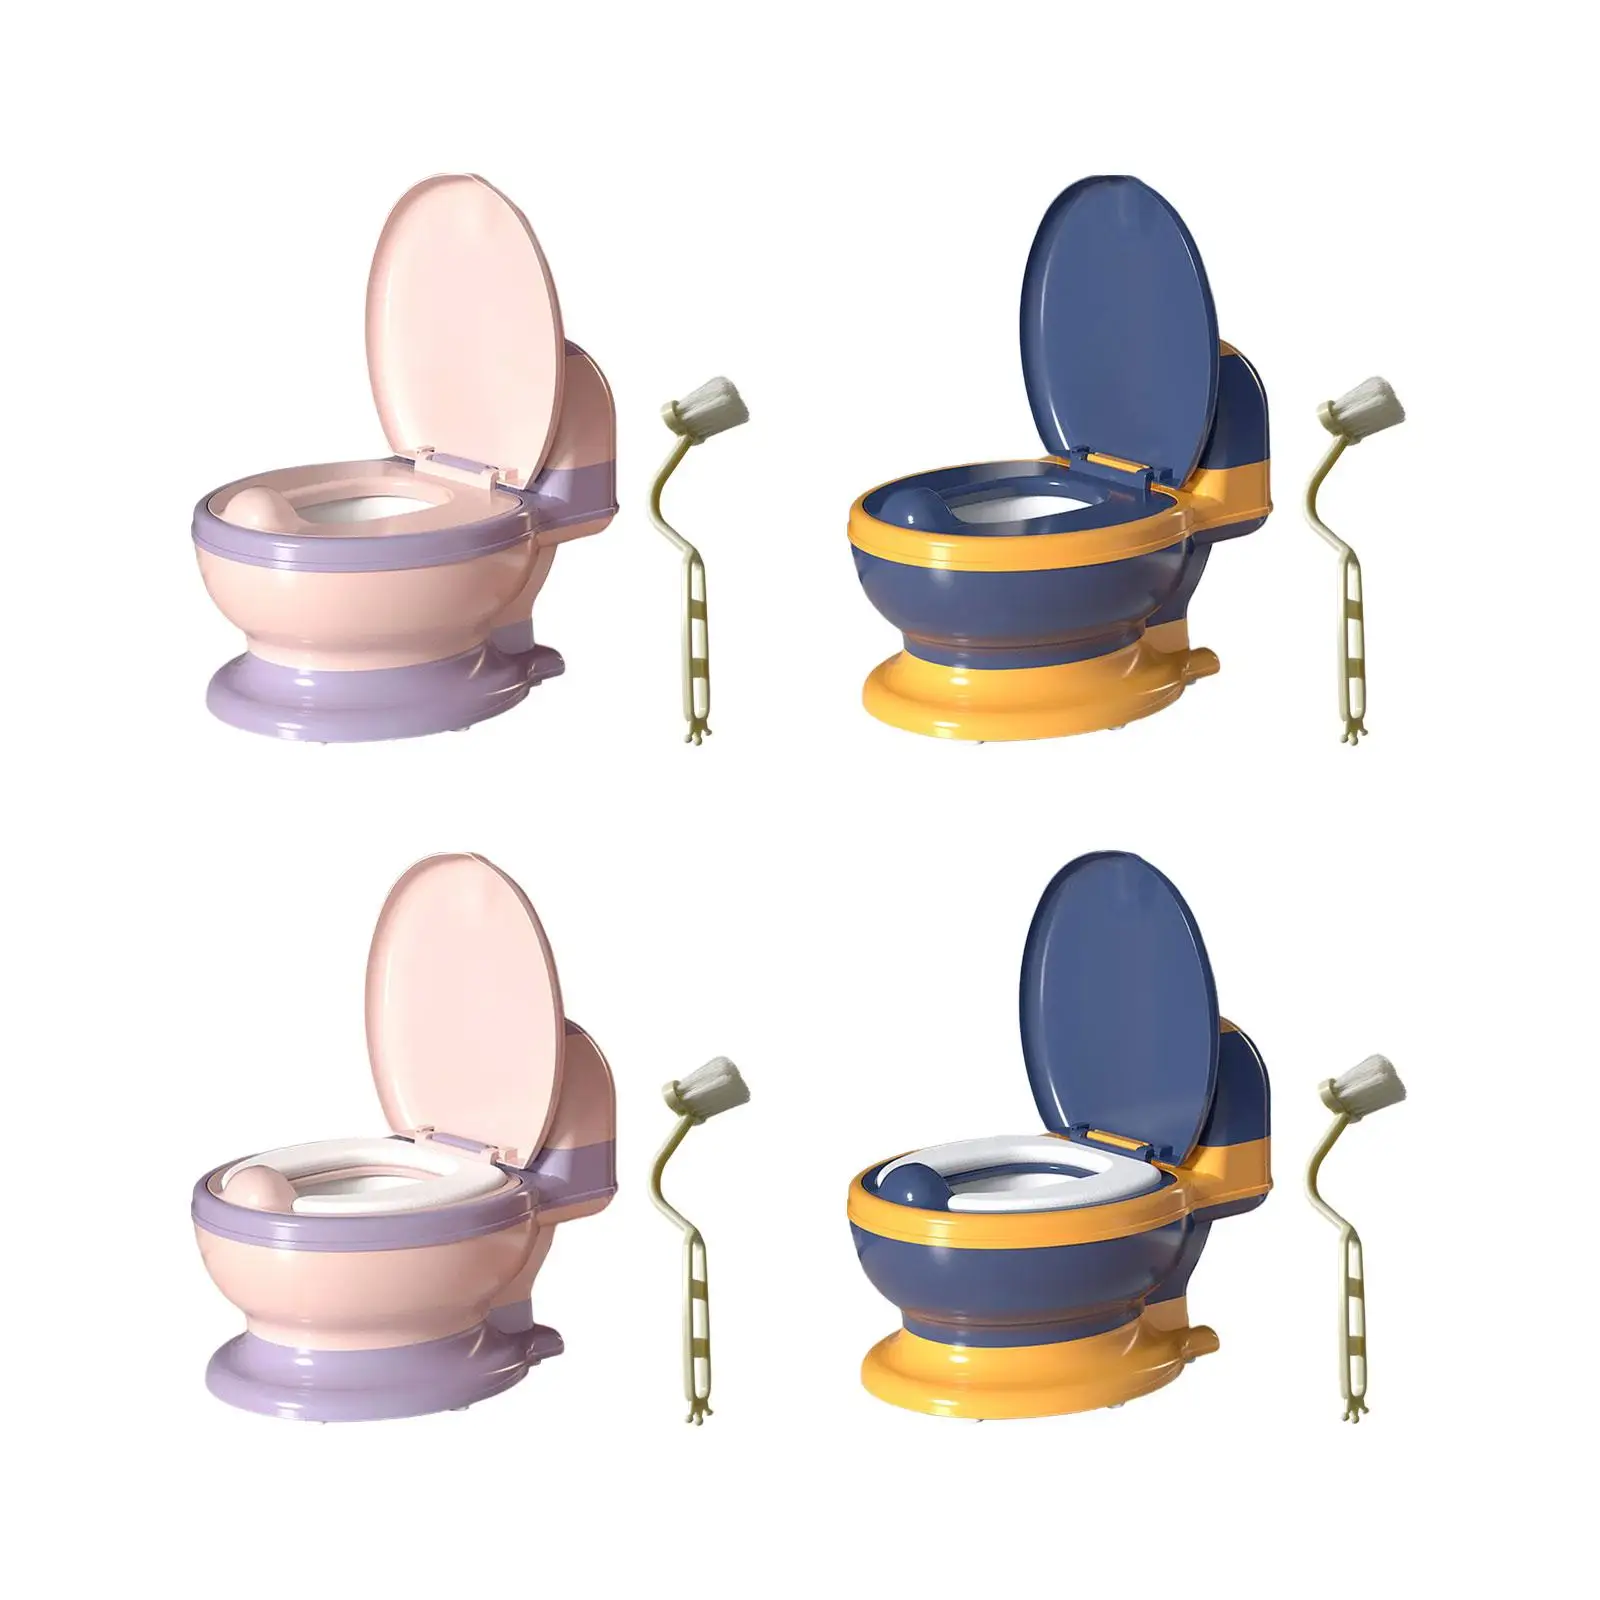 Baby Potty Toilet with Wipe Storage (Brush Included) with Spilling Guard Realistic Toilet Removable Potty Pot Girls Boys Infants